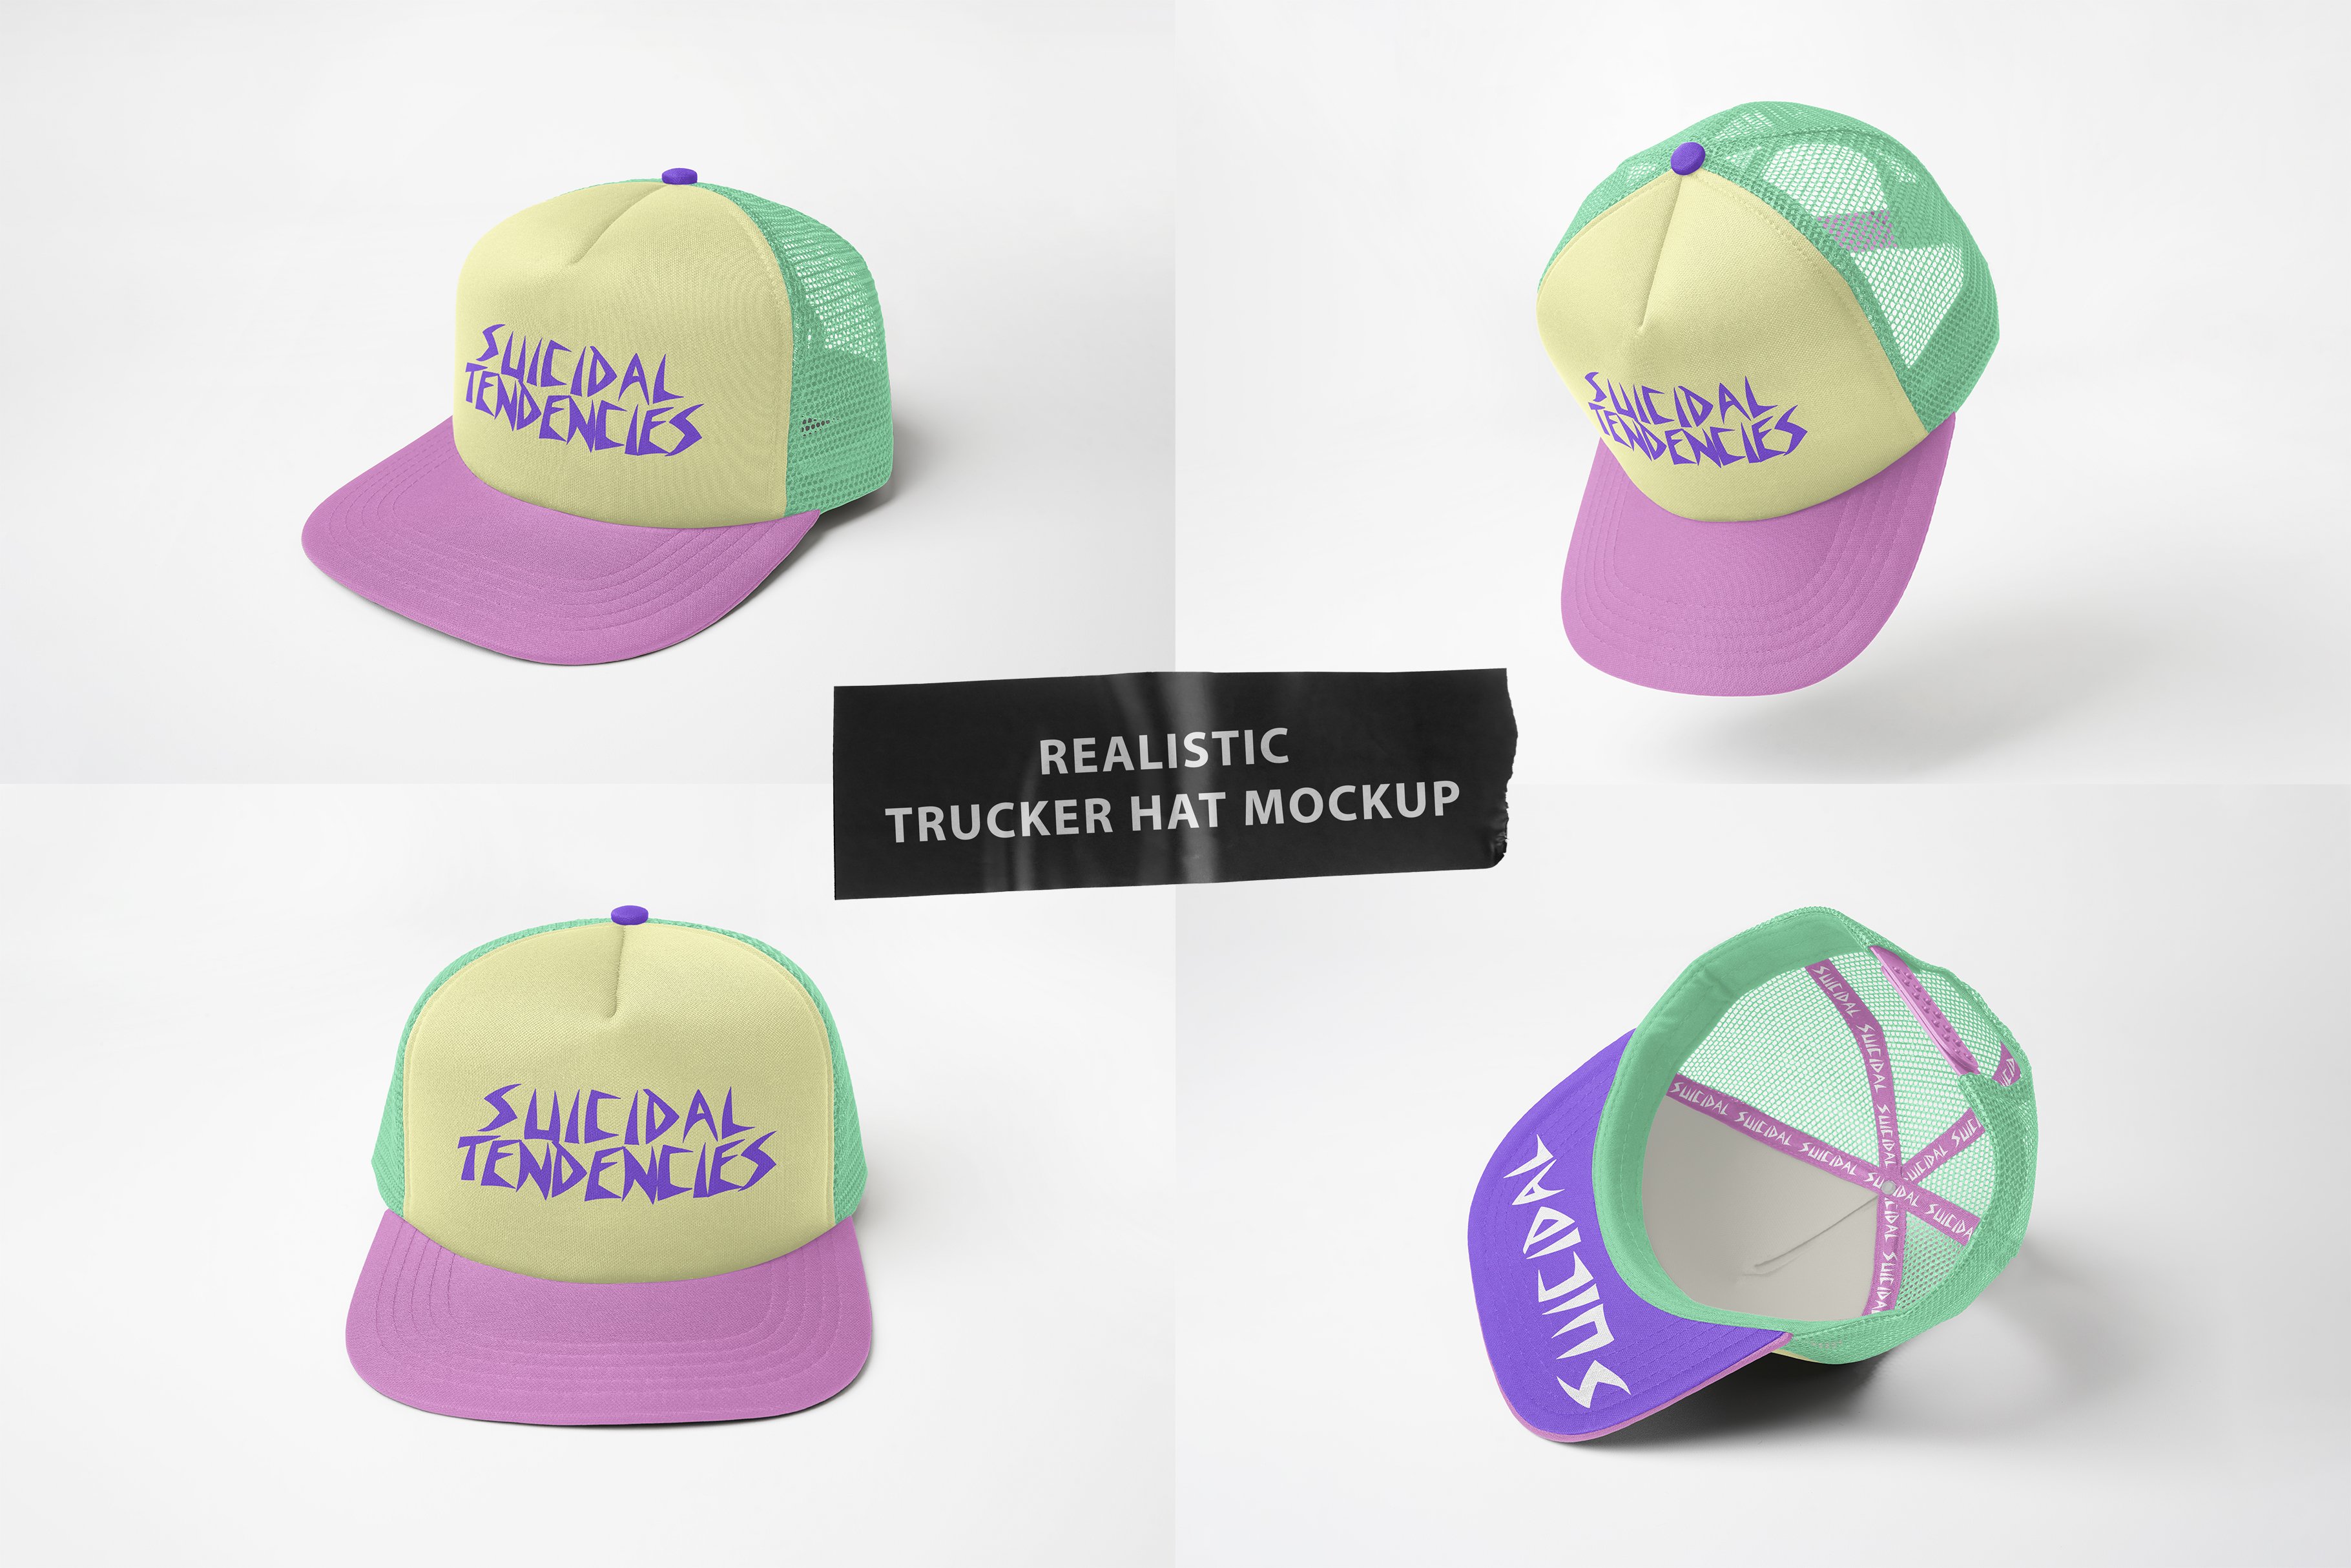 Realistic Trucker Hat Mockup cover image.